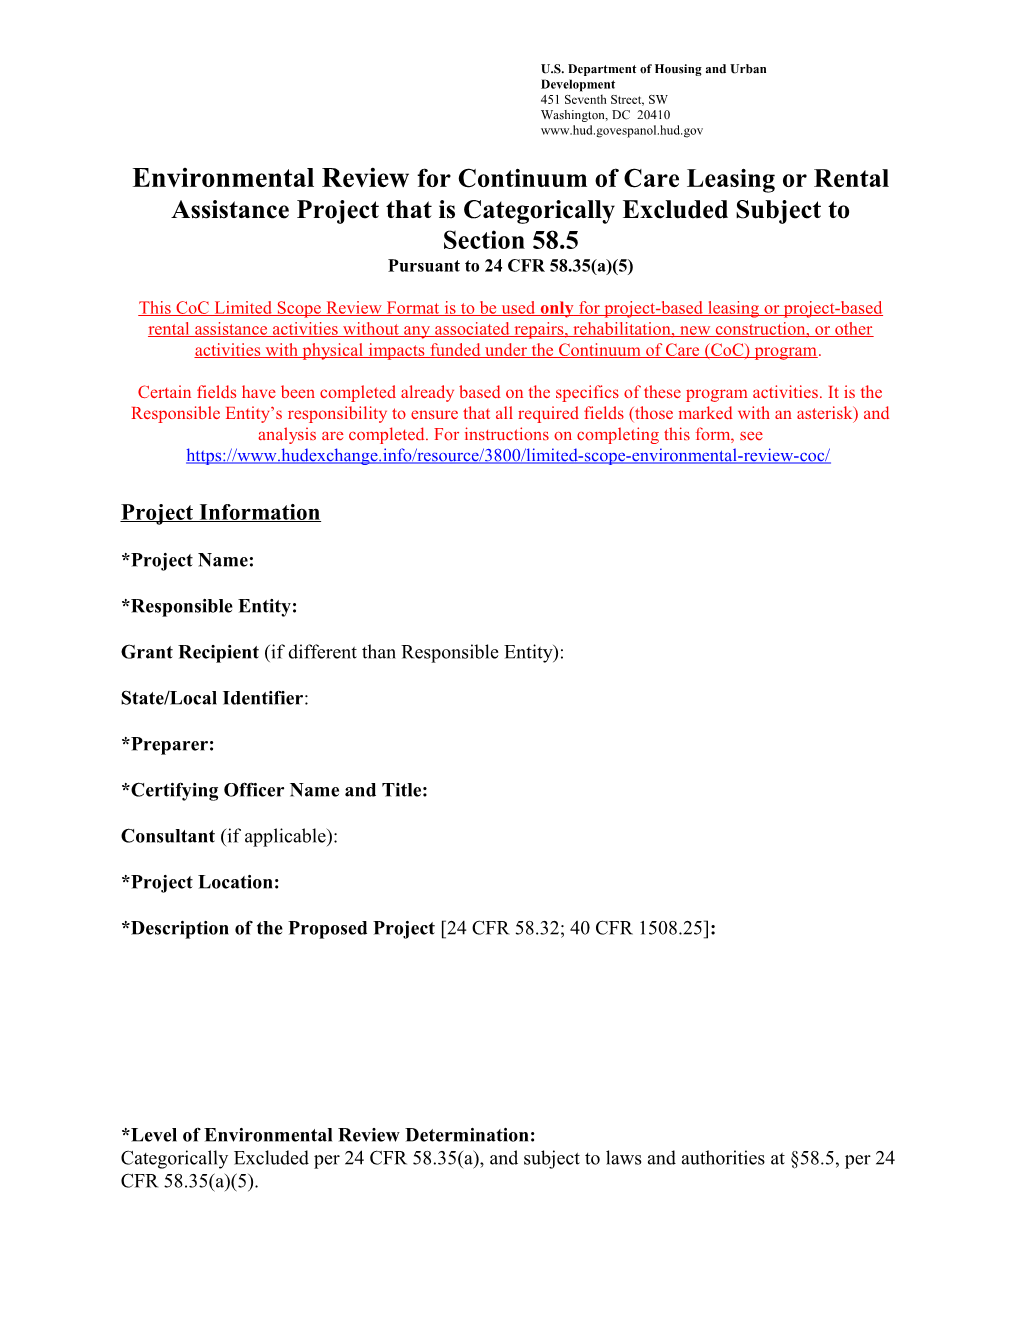 Limited Scope Environmental Review Format Continuum of Care (Coc)